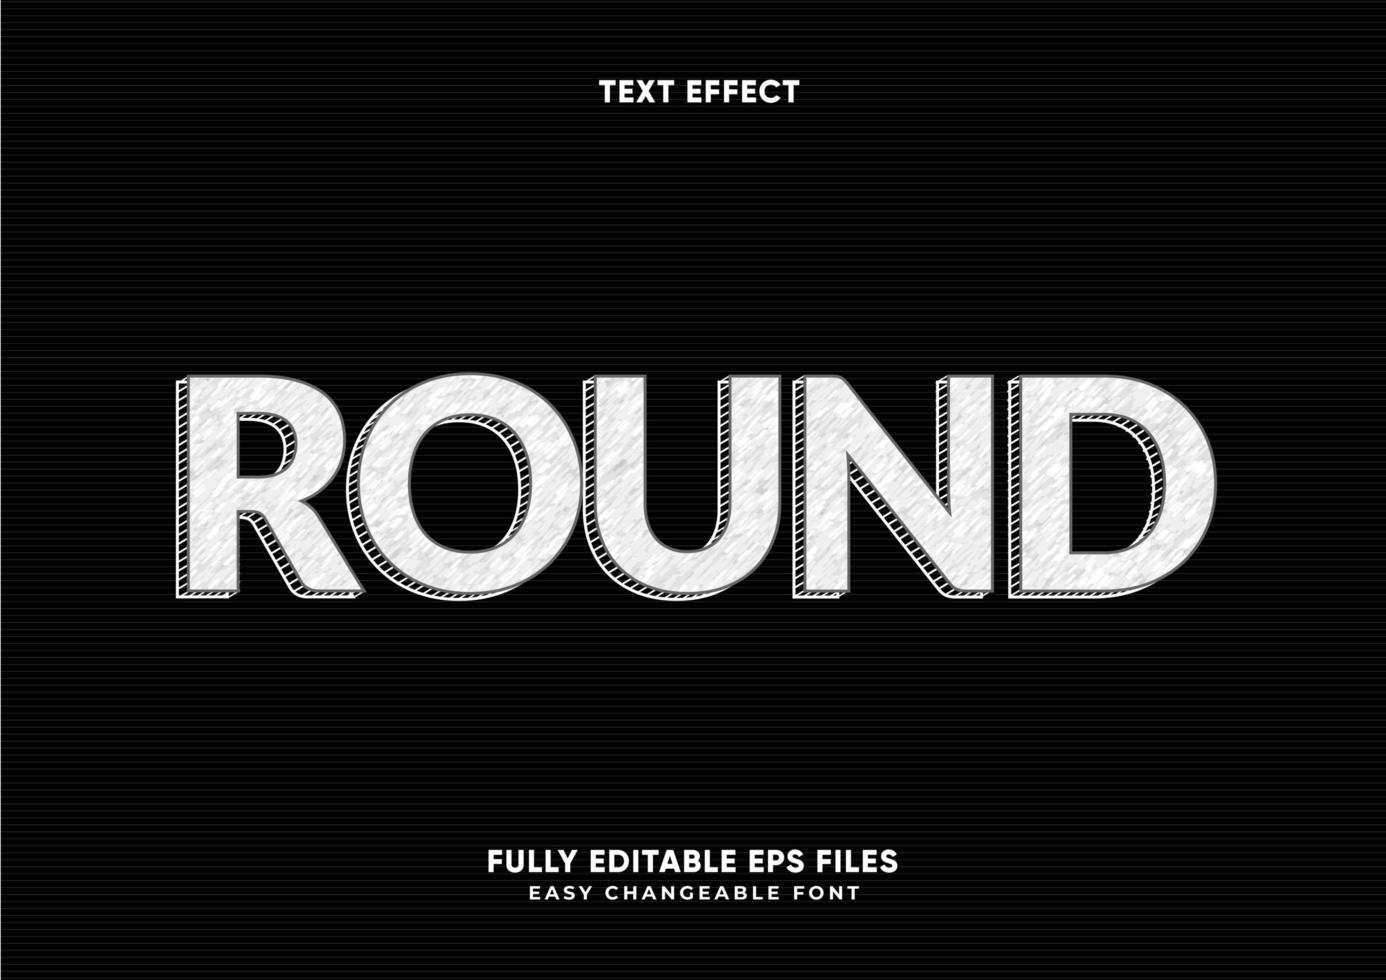 Gray and white with striped shadow text effect vector